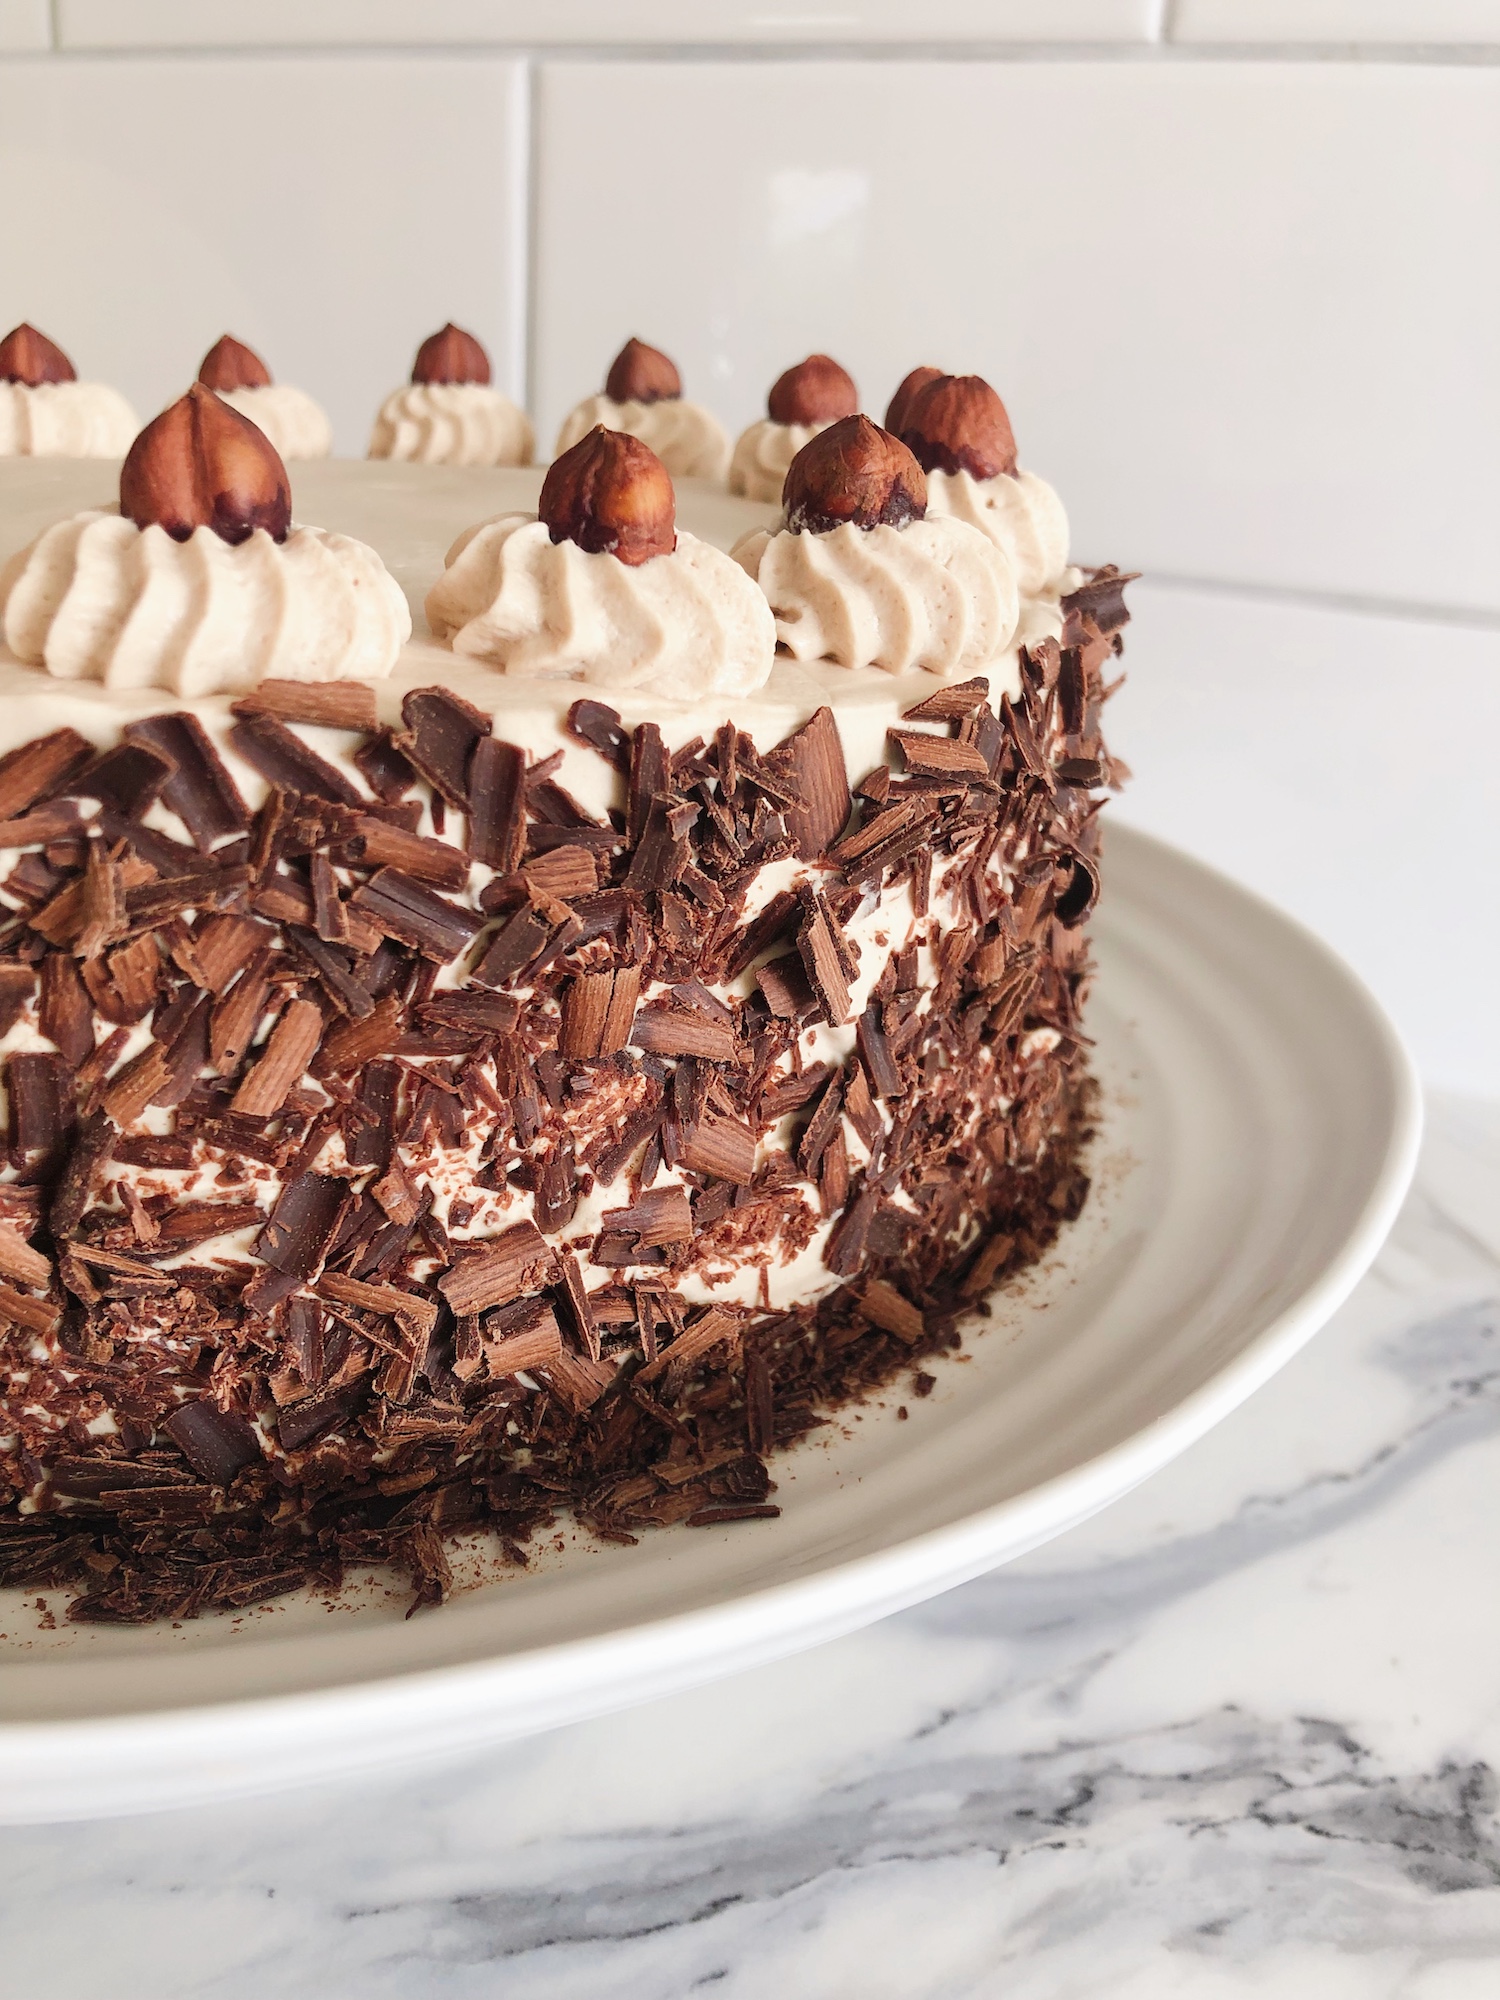 The side view of a Hazelnut Mocha Spelt Torte decorated with whole hazelnuts and chocolate shavings. The torte is on a low white cake stand with white tiles on the wall behind it.